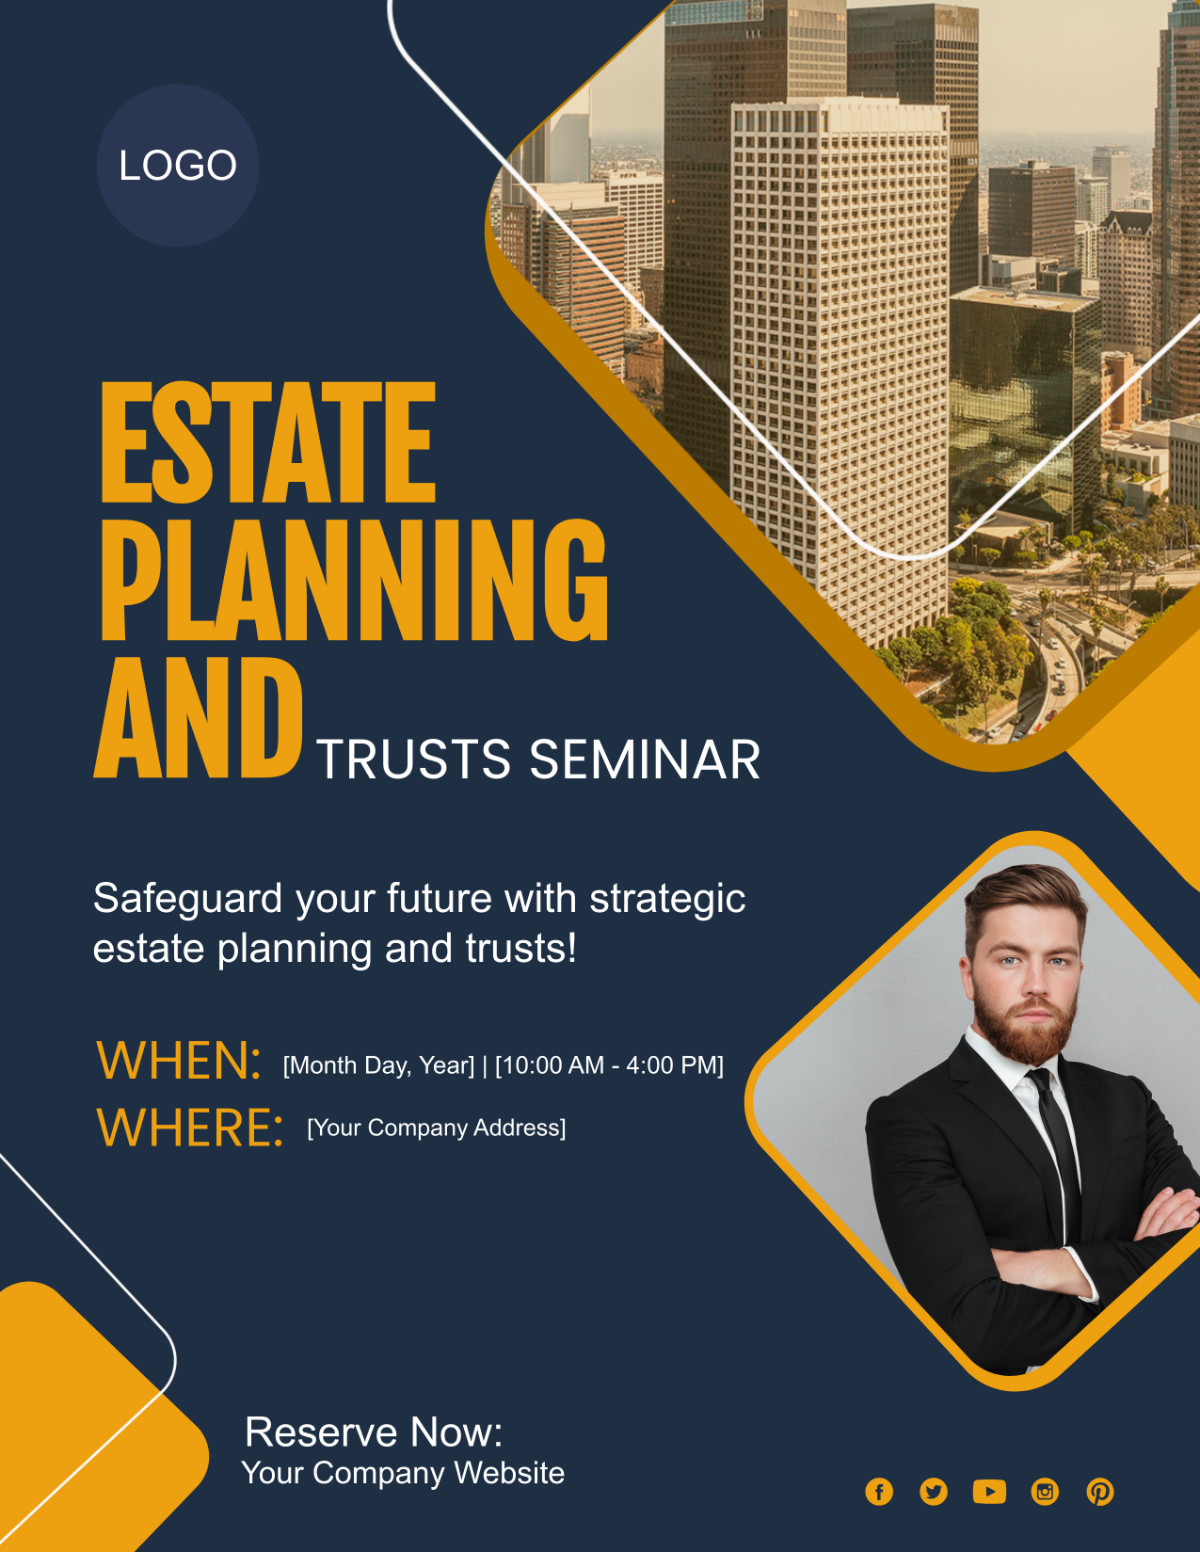 Estate Planning and Trusts Seminar Flyer